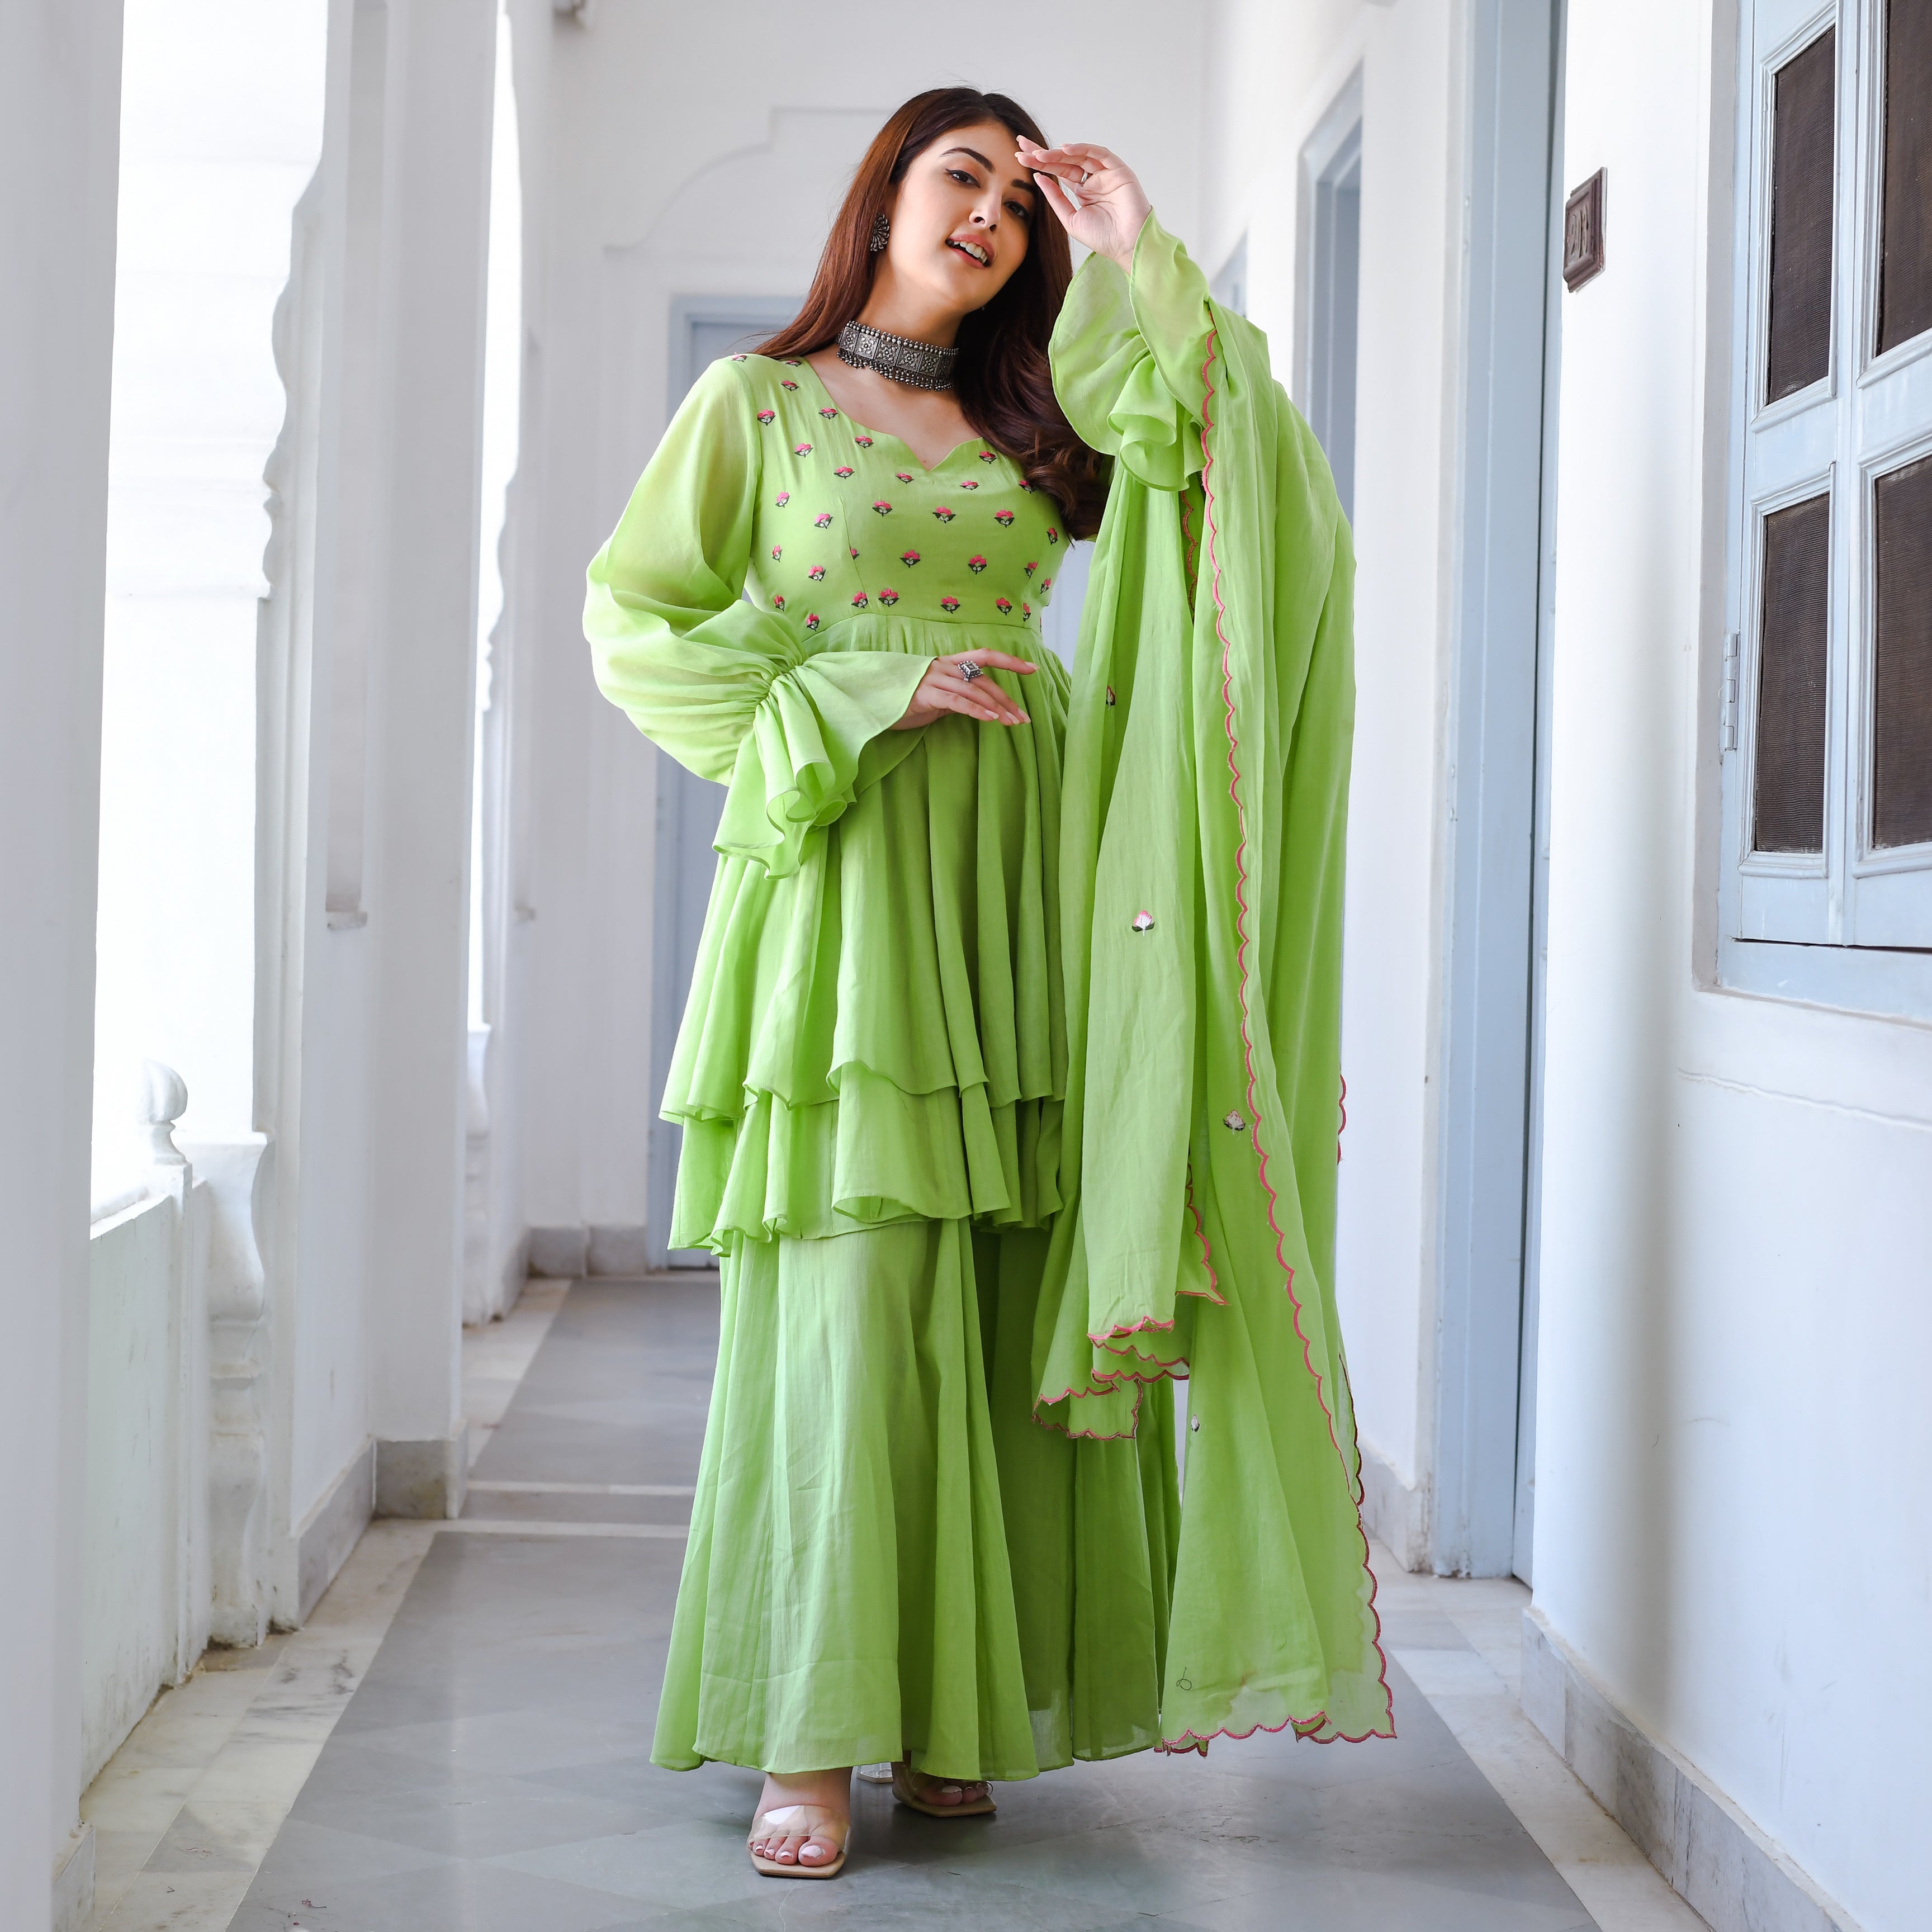 Buy Rhysley Light Green Cotton Stitched Ethnic Printed 3/4 Sleeve Calf  Length Round Neck Casual Festive Anarkali Kurti at Amazon.in